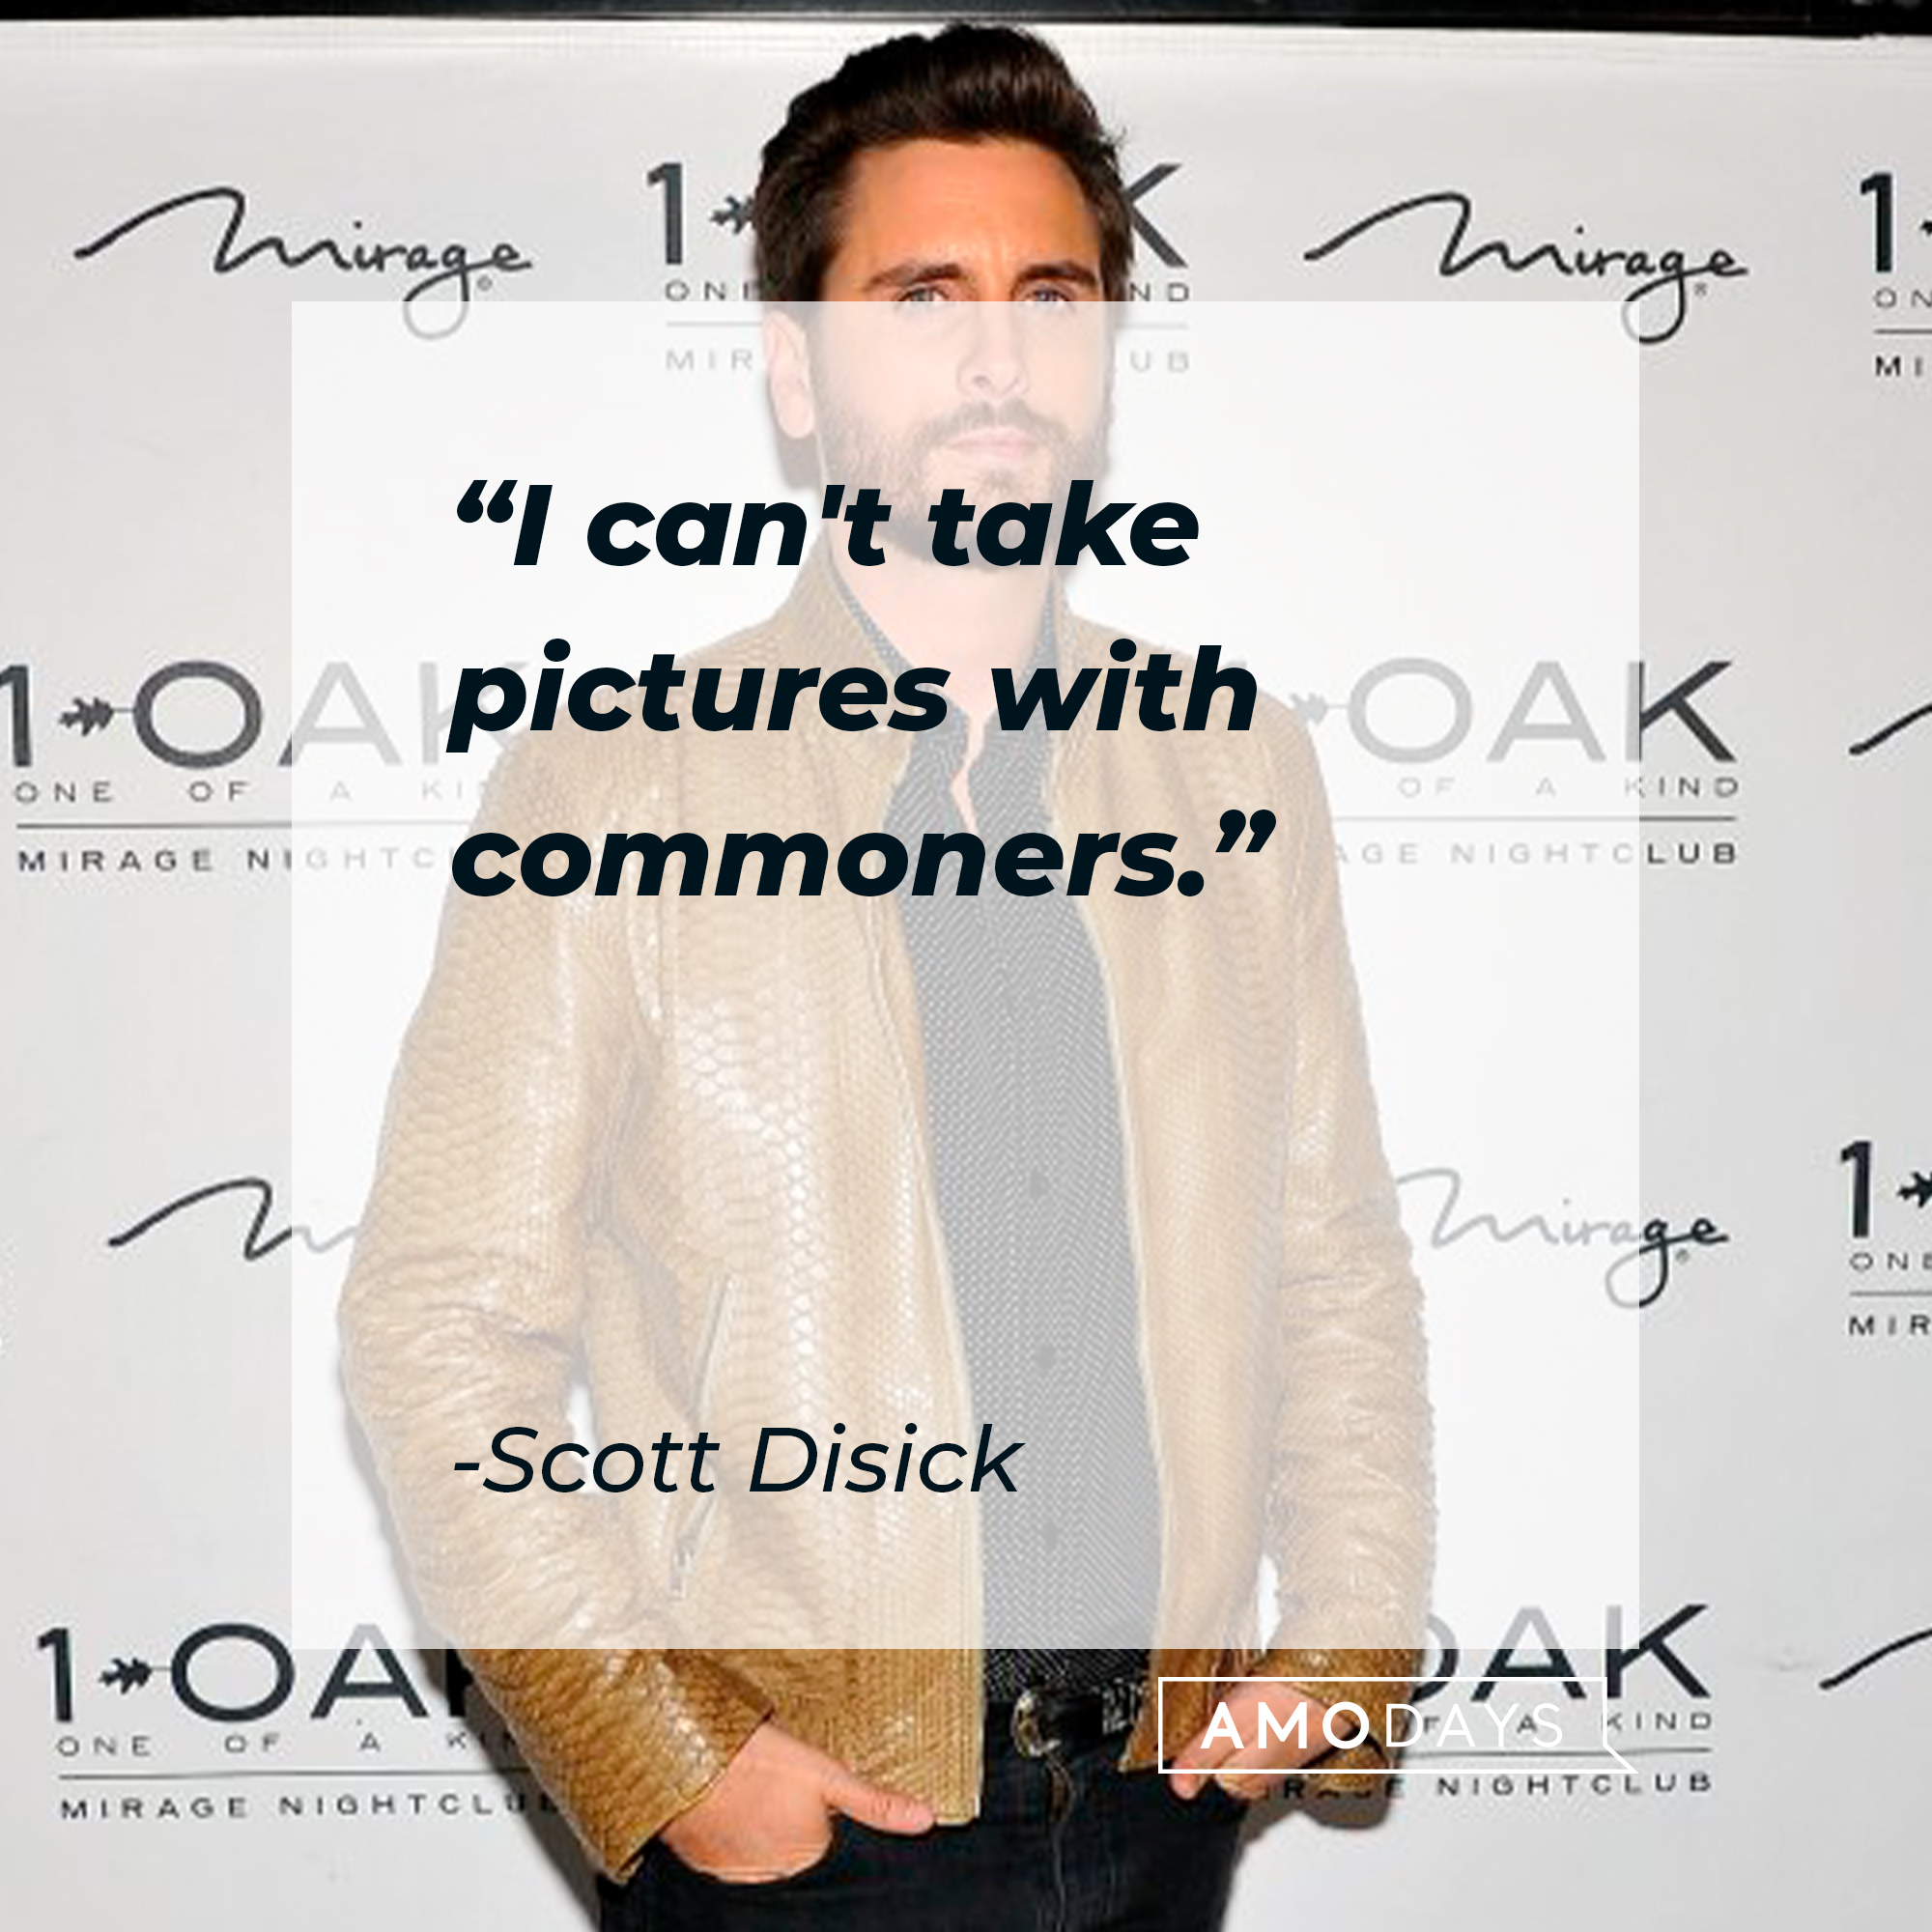 Scott Disick quote: "I can't take pictures with commoners." | Source: Getty Images